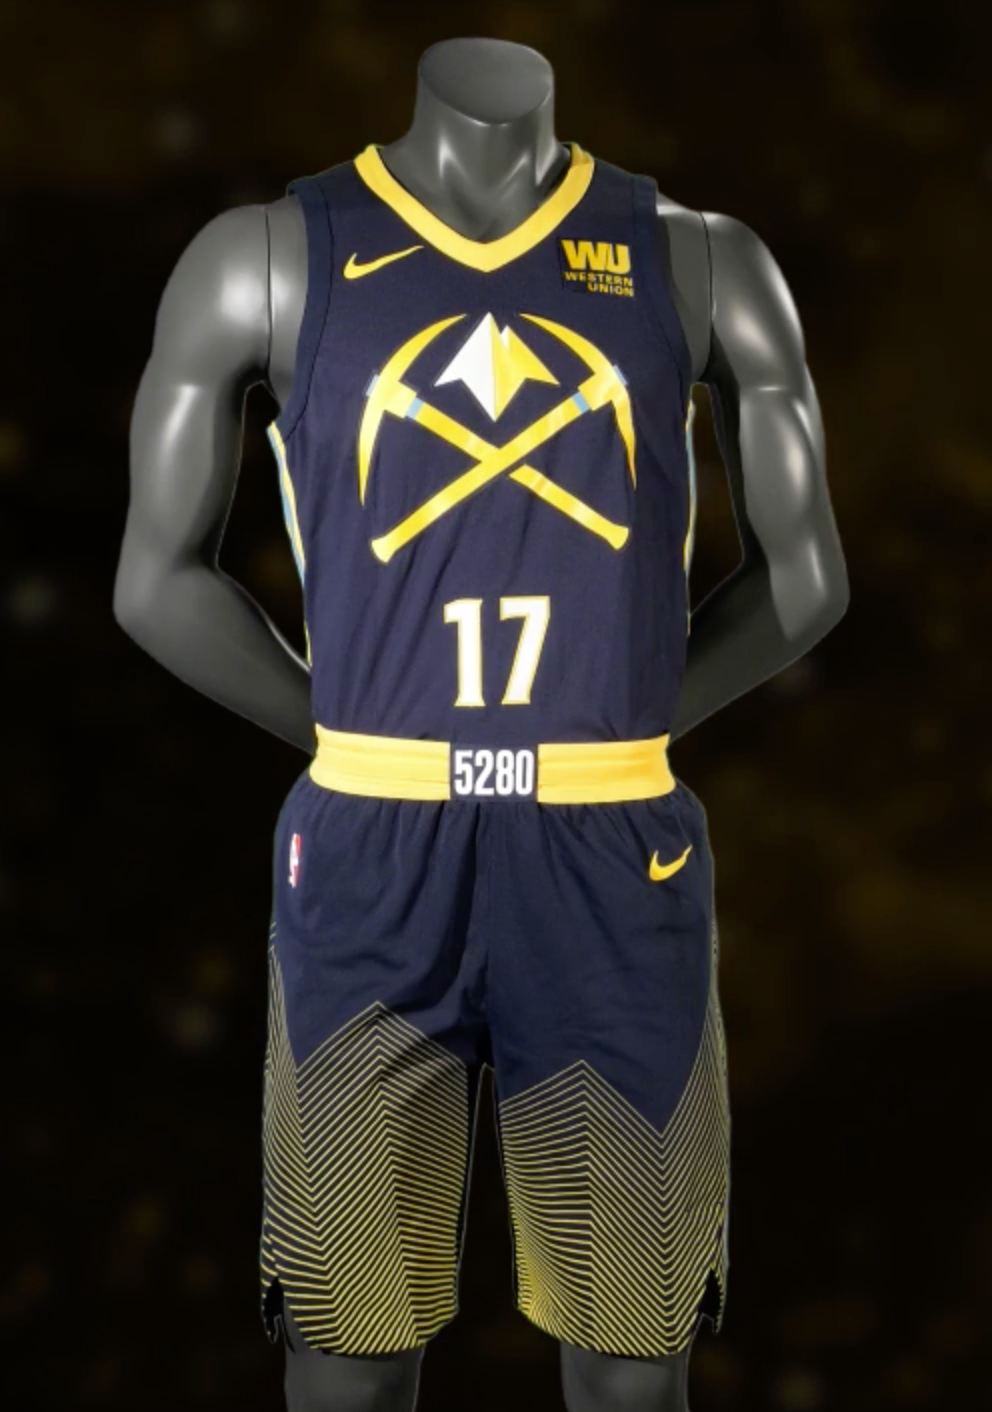 An Exhaustive Ranking of the New Nike “City Edition” Jerseys, by Evan T.  Haynos, SportsRaid